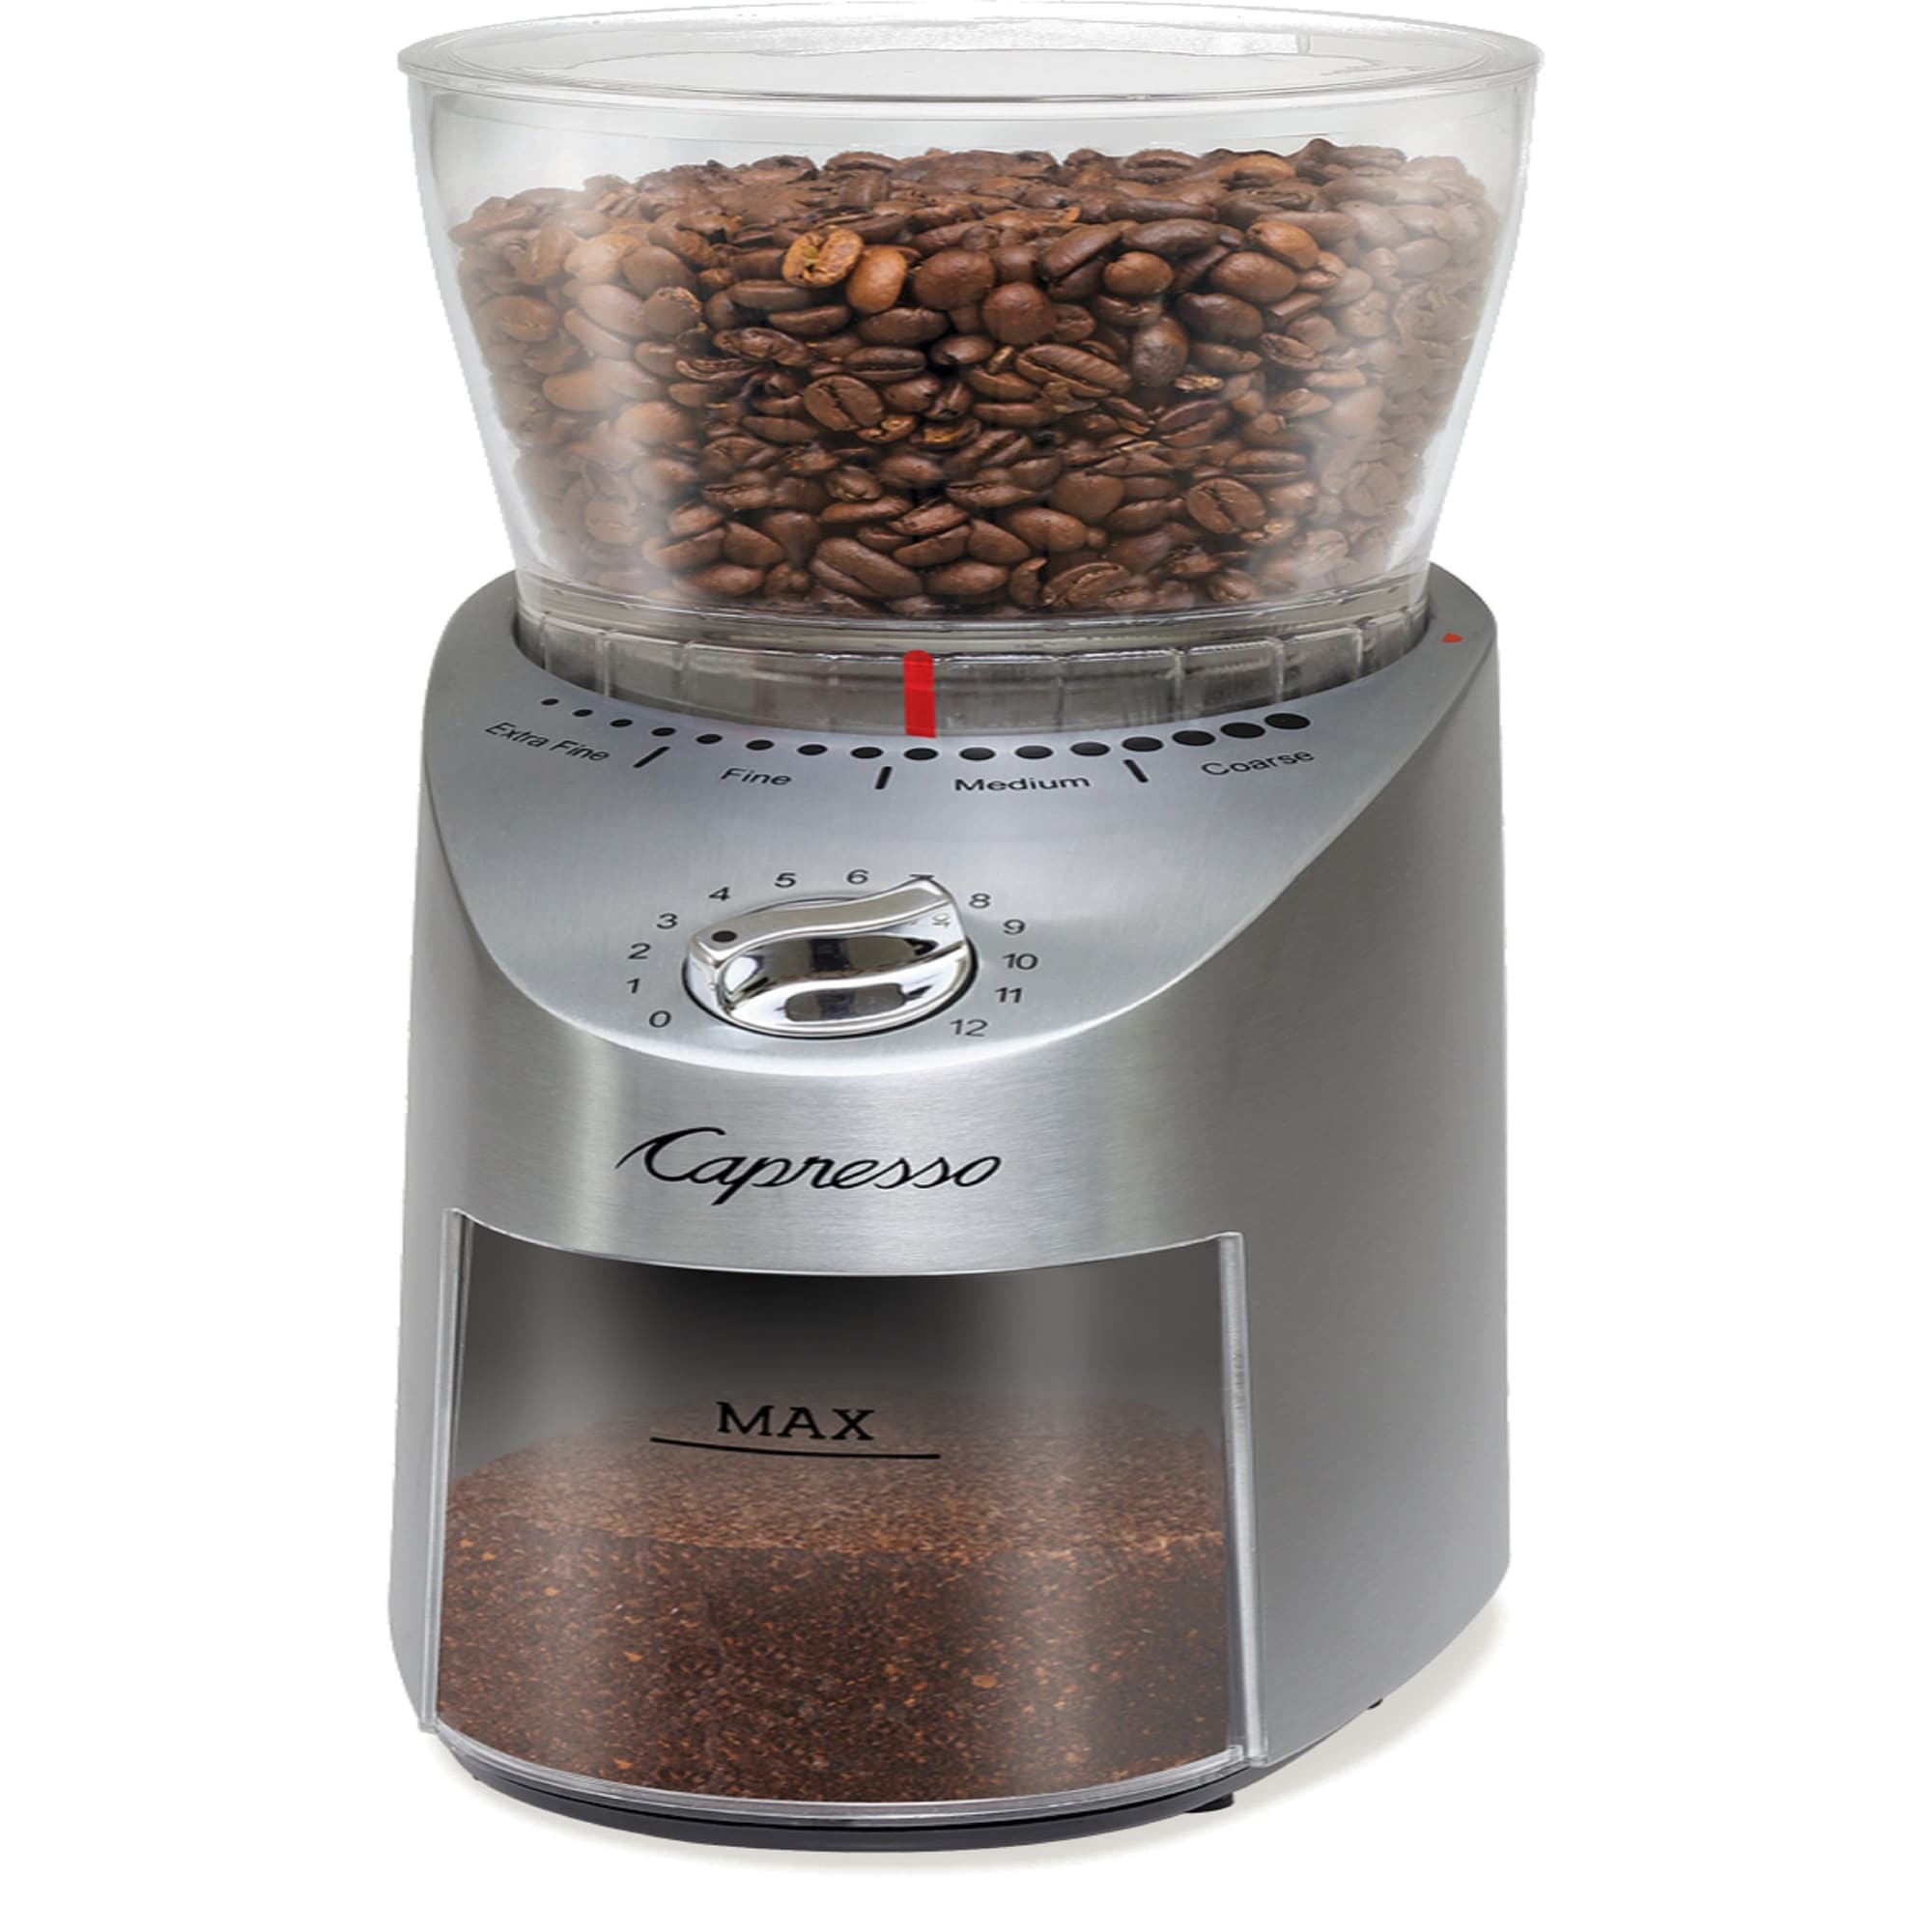 https://ak1.ostkcdn.com/images/products/is/images/direct/c4f7ef3669efc0c53d2b5c3f06fb6b5c3e46ca2a/Capresso-Infinity-Plus-Conical-Burr-Grinder-%28Stainless-Steel%29-Bundle.jpg